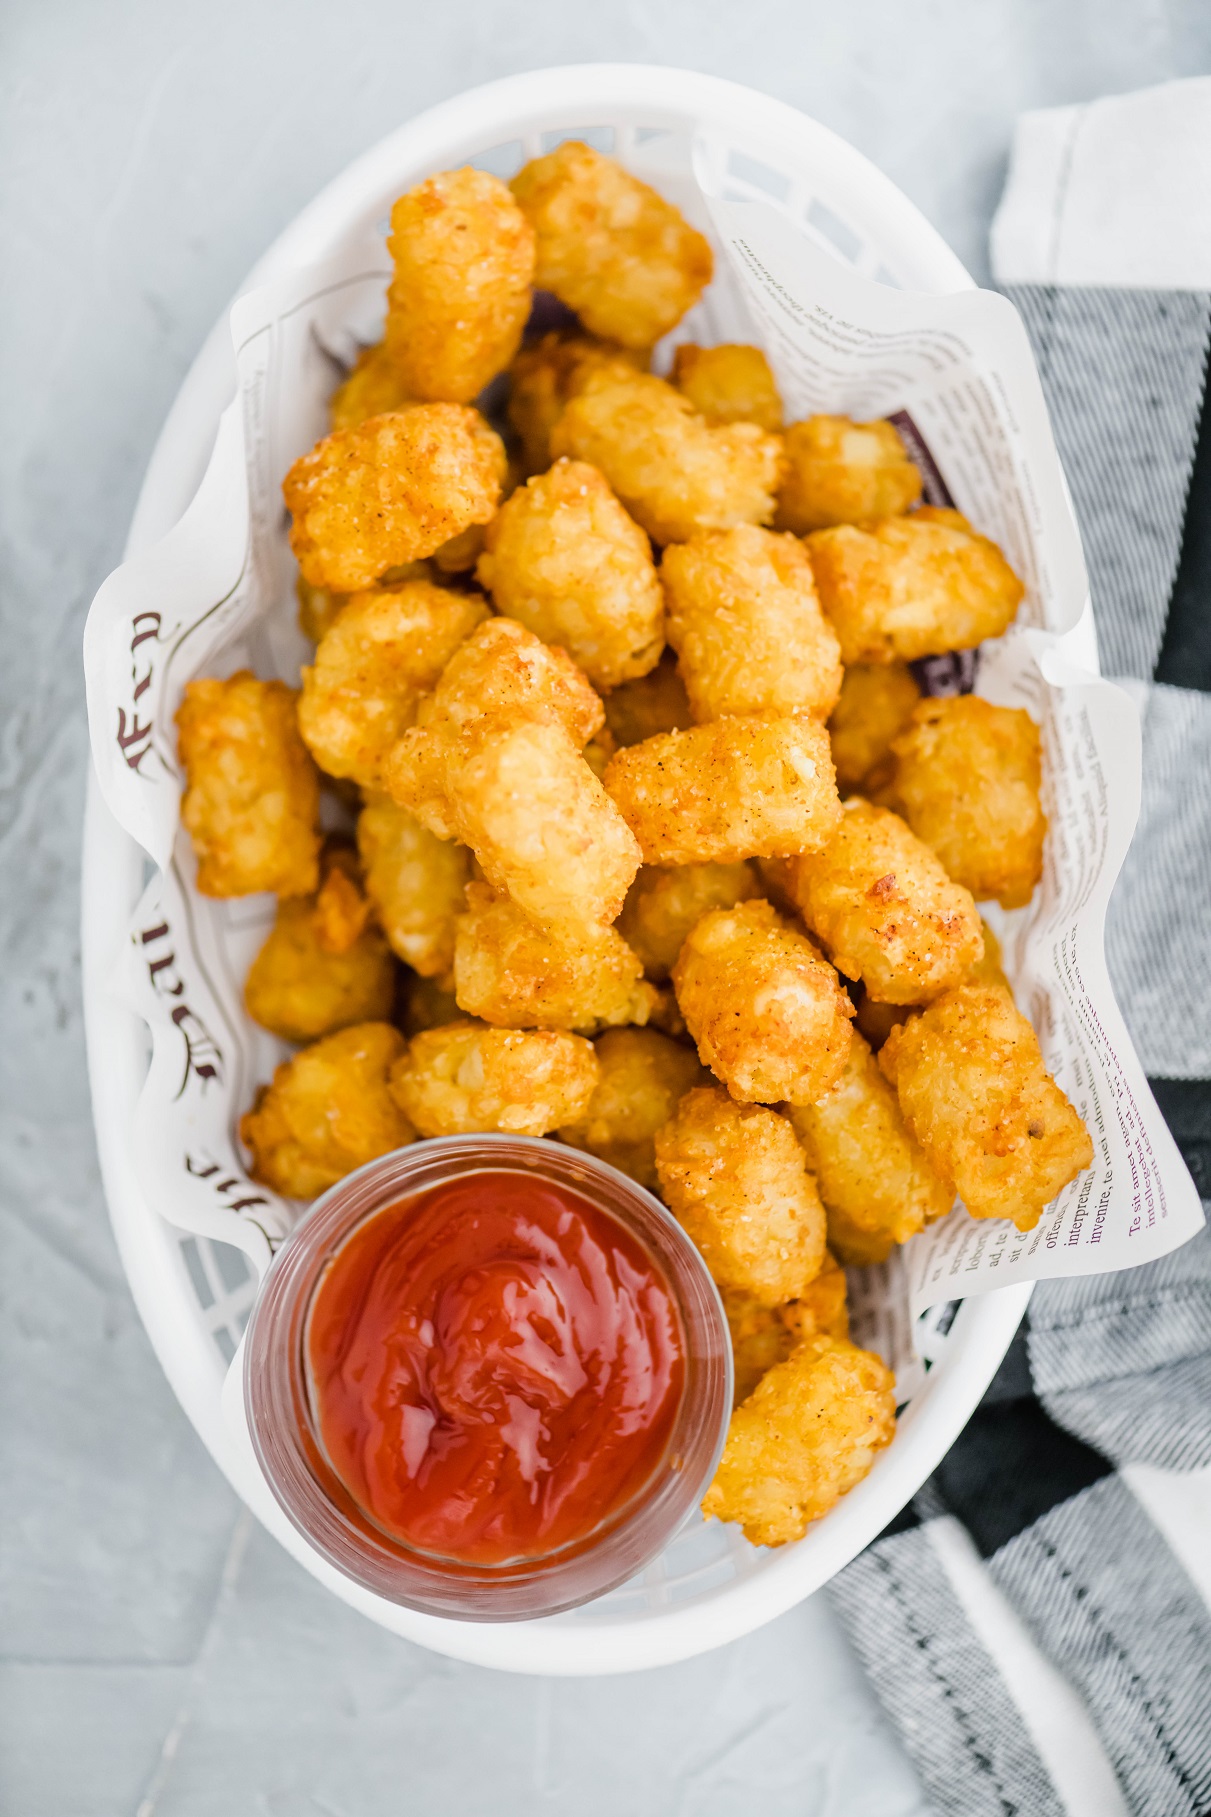 White plastic basket lined with newspaper parchment and filled with crispy tater tots and a small glass bowl of ketchup